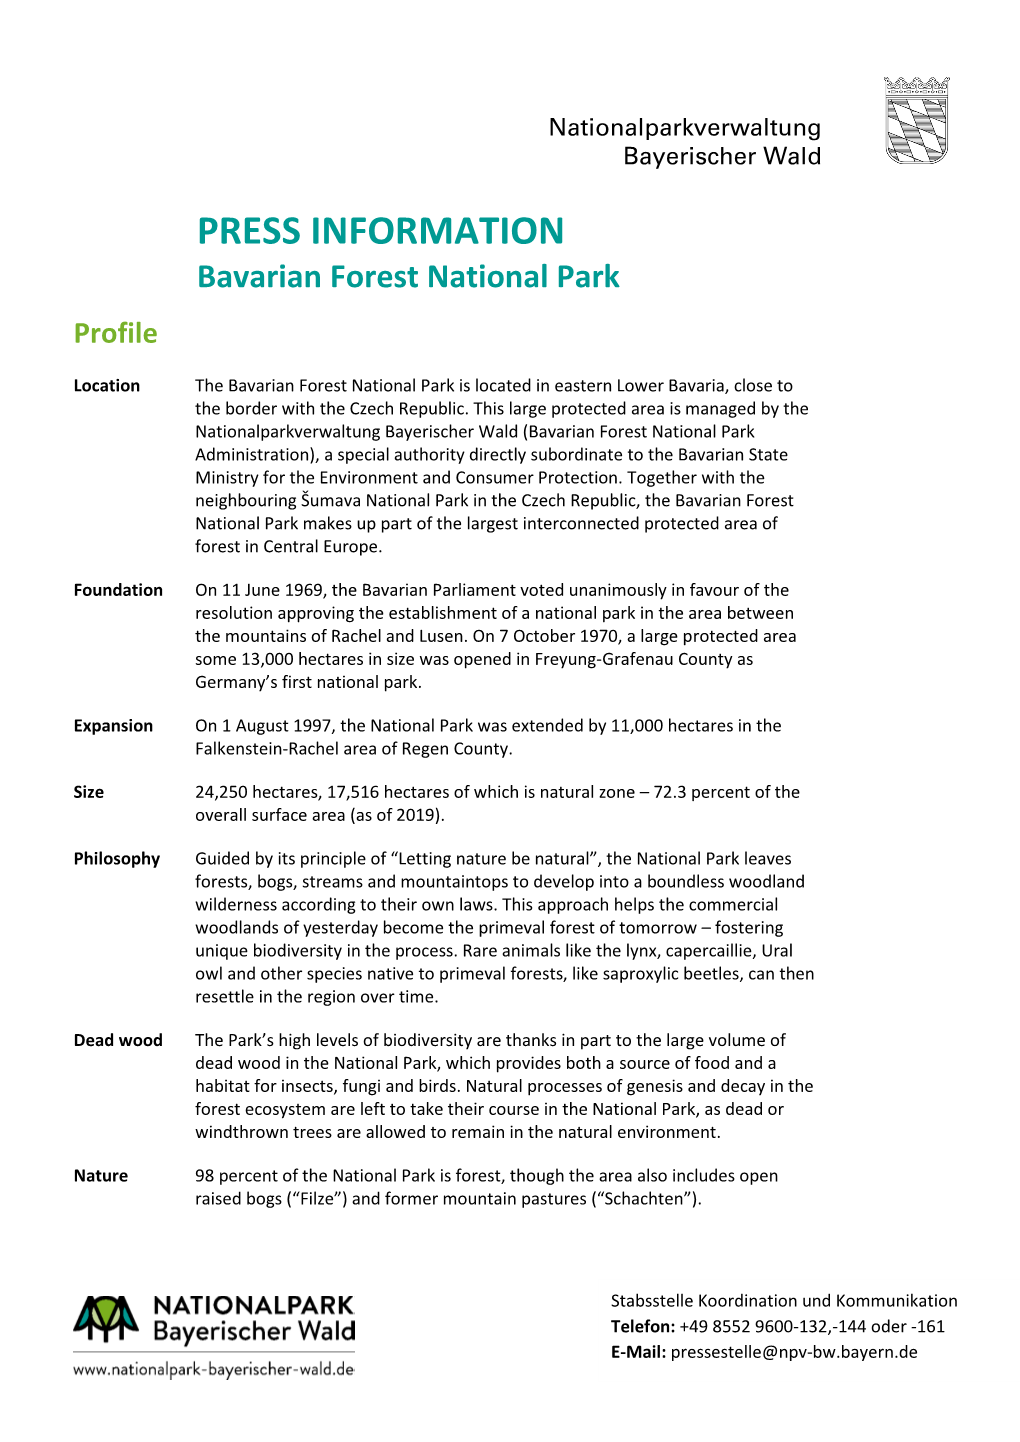 Press Informations About Bavarian Forest National Park